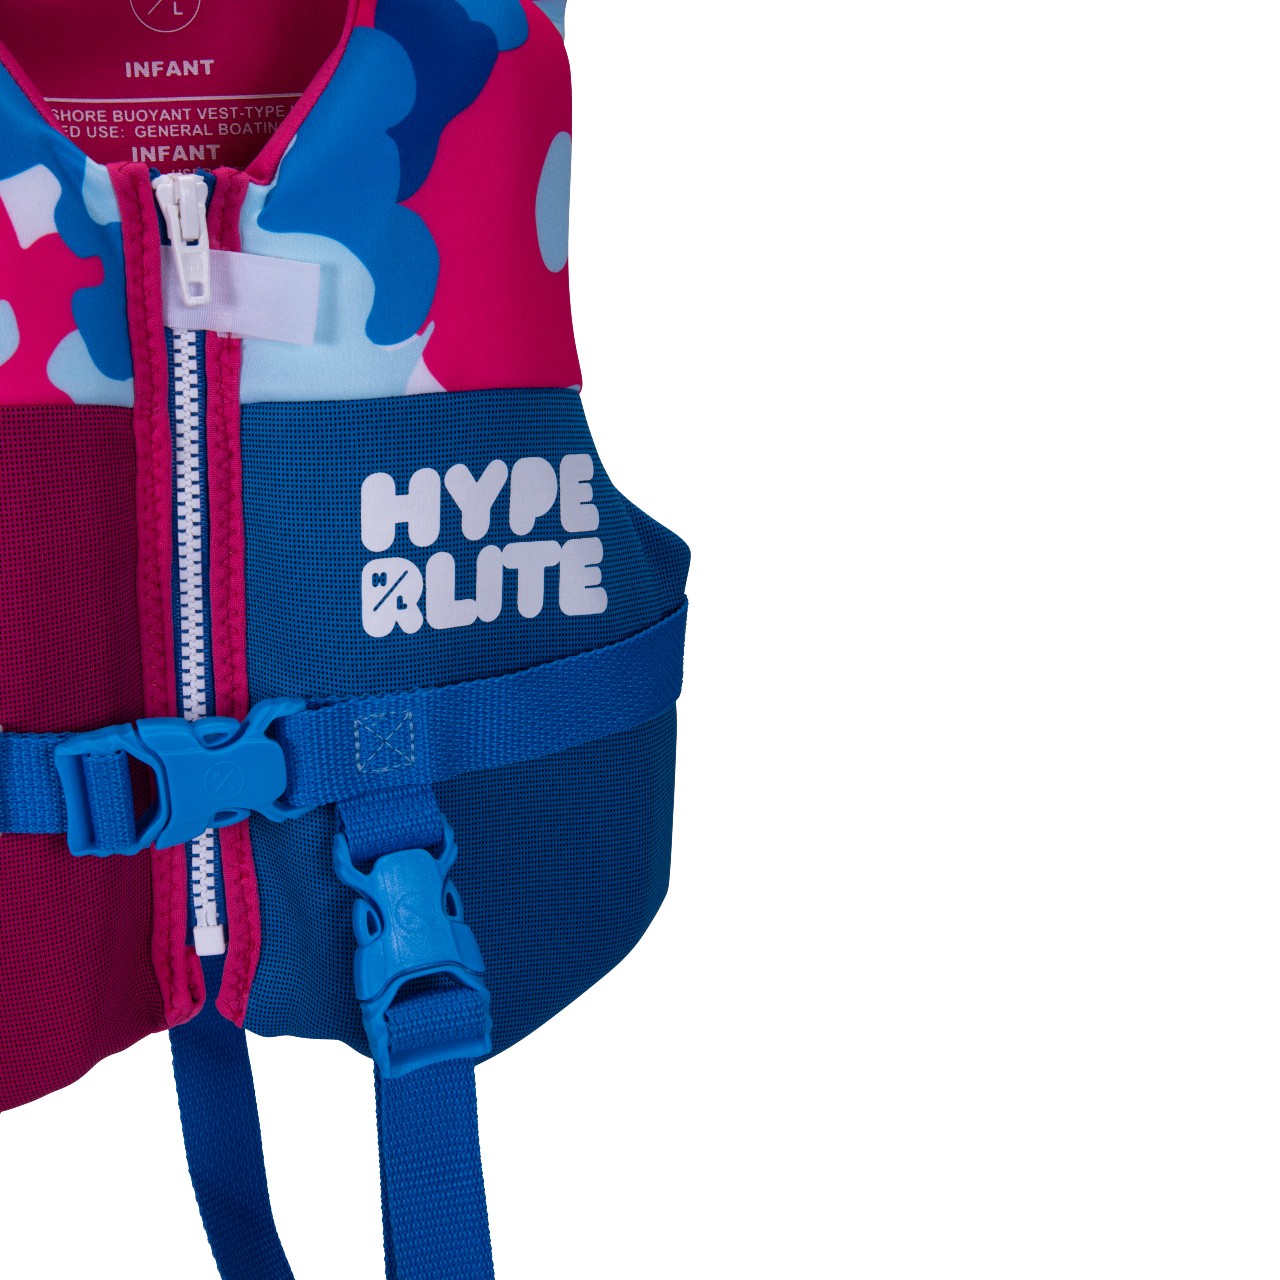 Hyperlit Indy Girls Toddle Life Jacket - 88 Gear